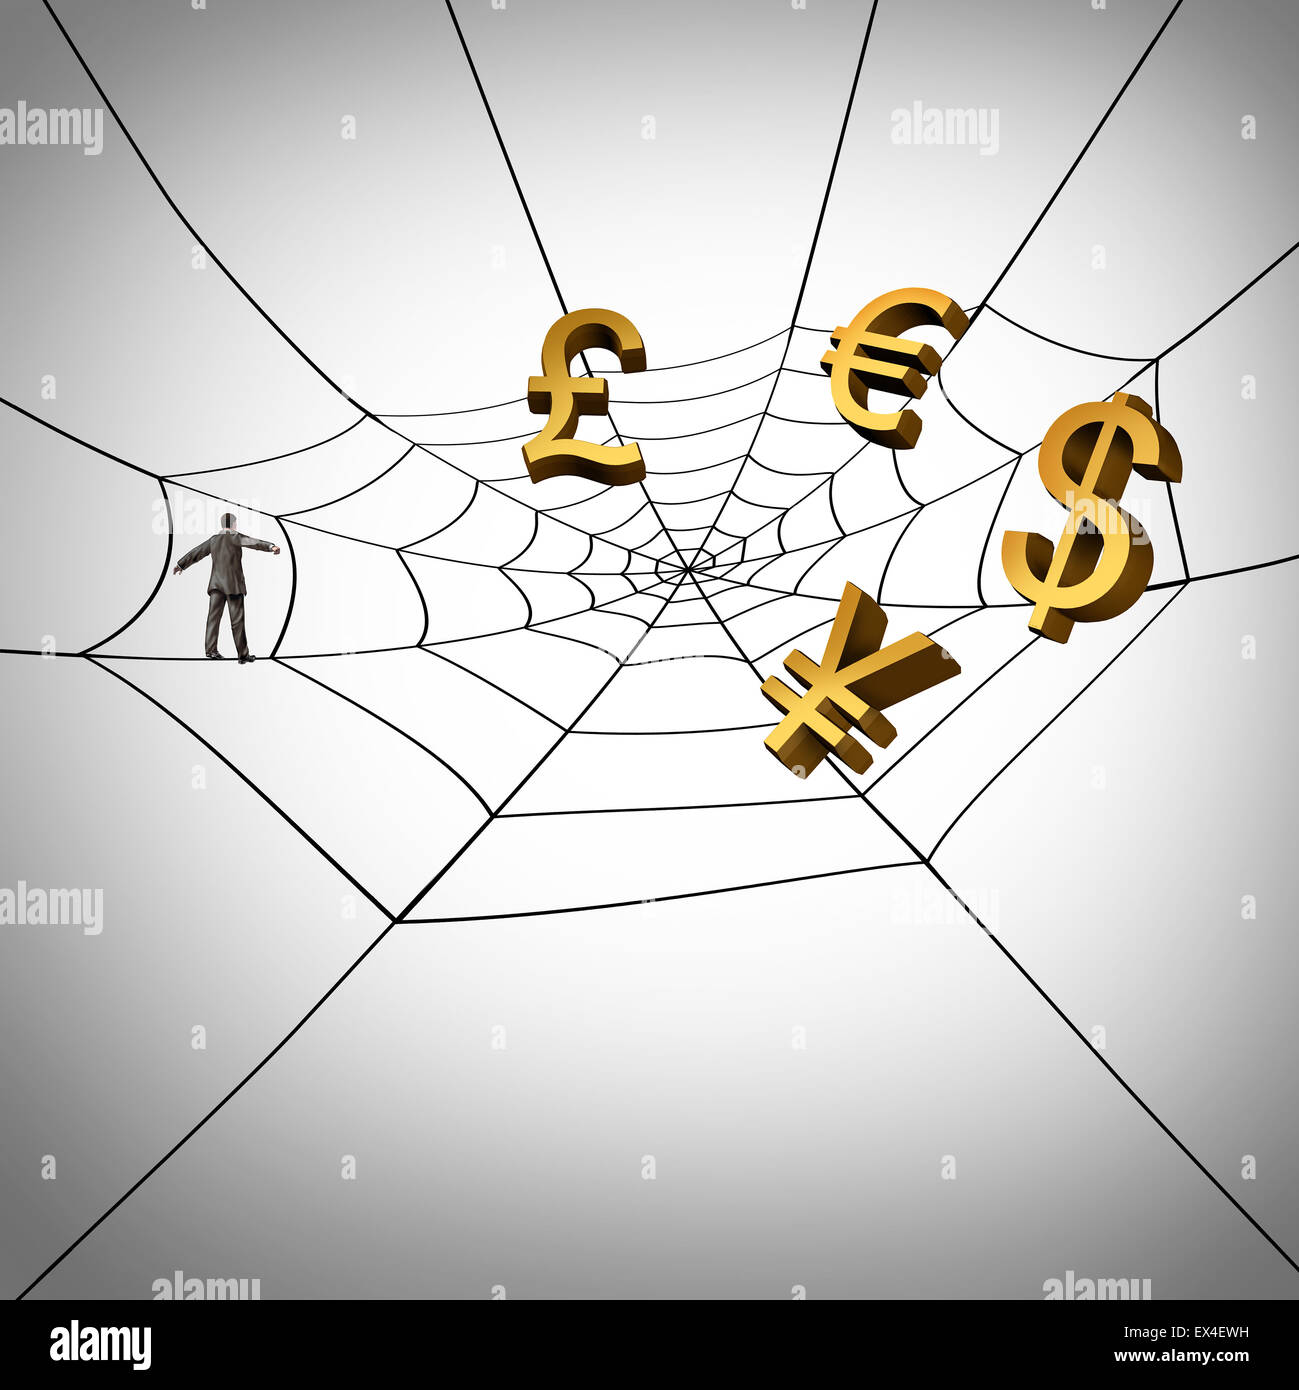 Web business concept and earning global money from the internet as a businessman walking on a spider web symbol with currency icons trapped in the network as an entrepreneur collecting income from international internet sales. Stock Photo